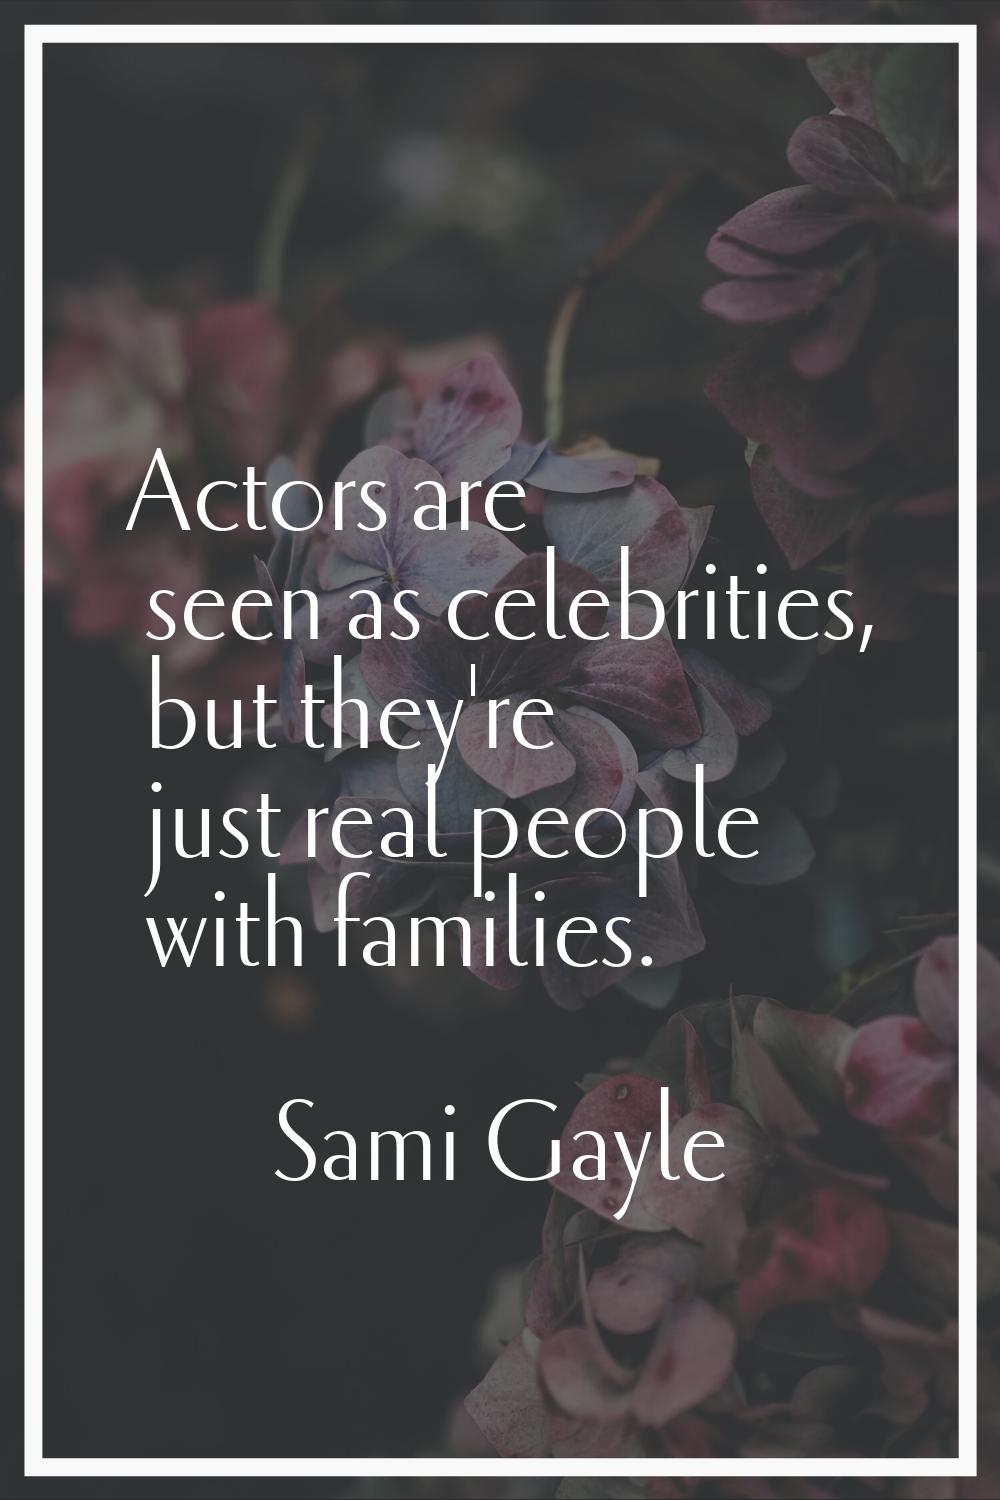 Actors are seen as celebrities, but they're just real people with families.